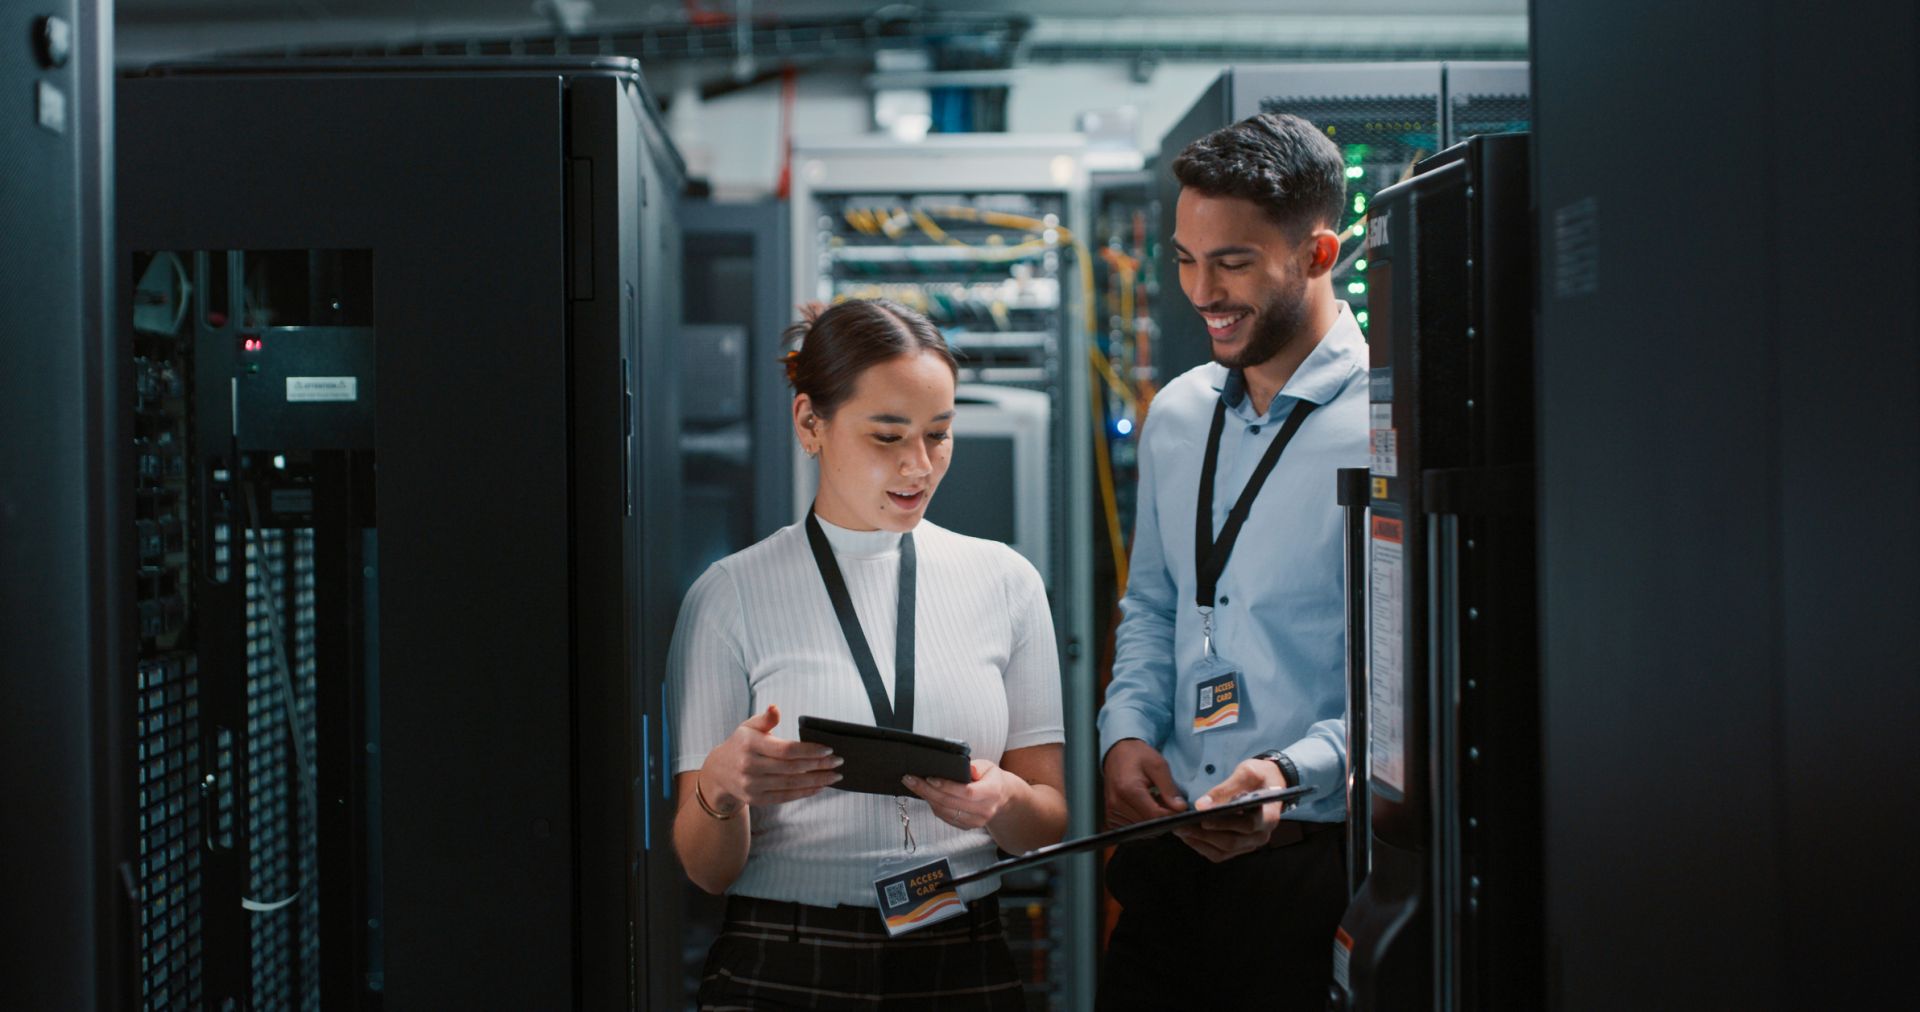 Man and woman in a server room